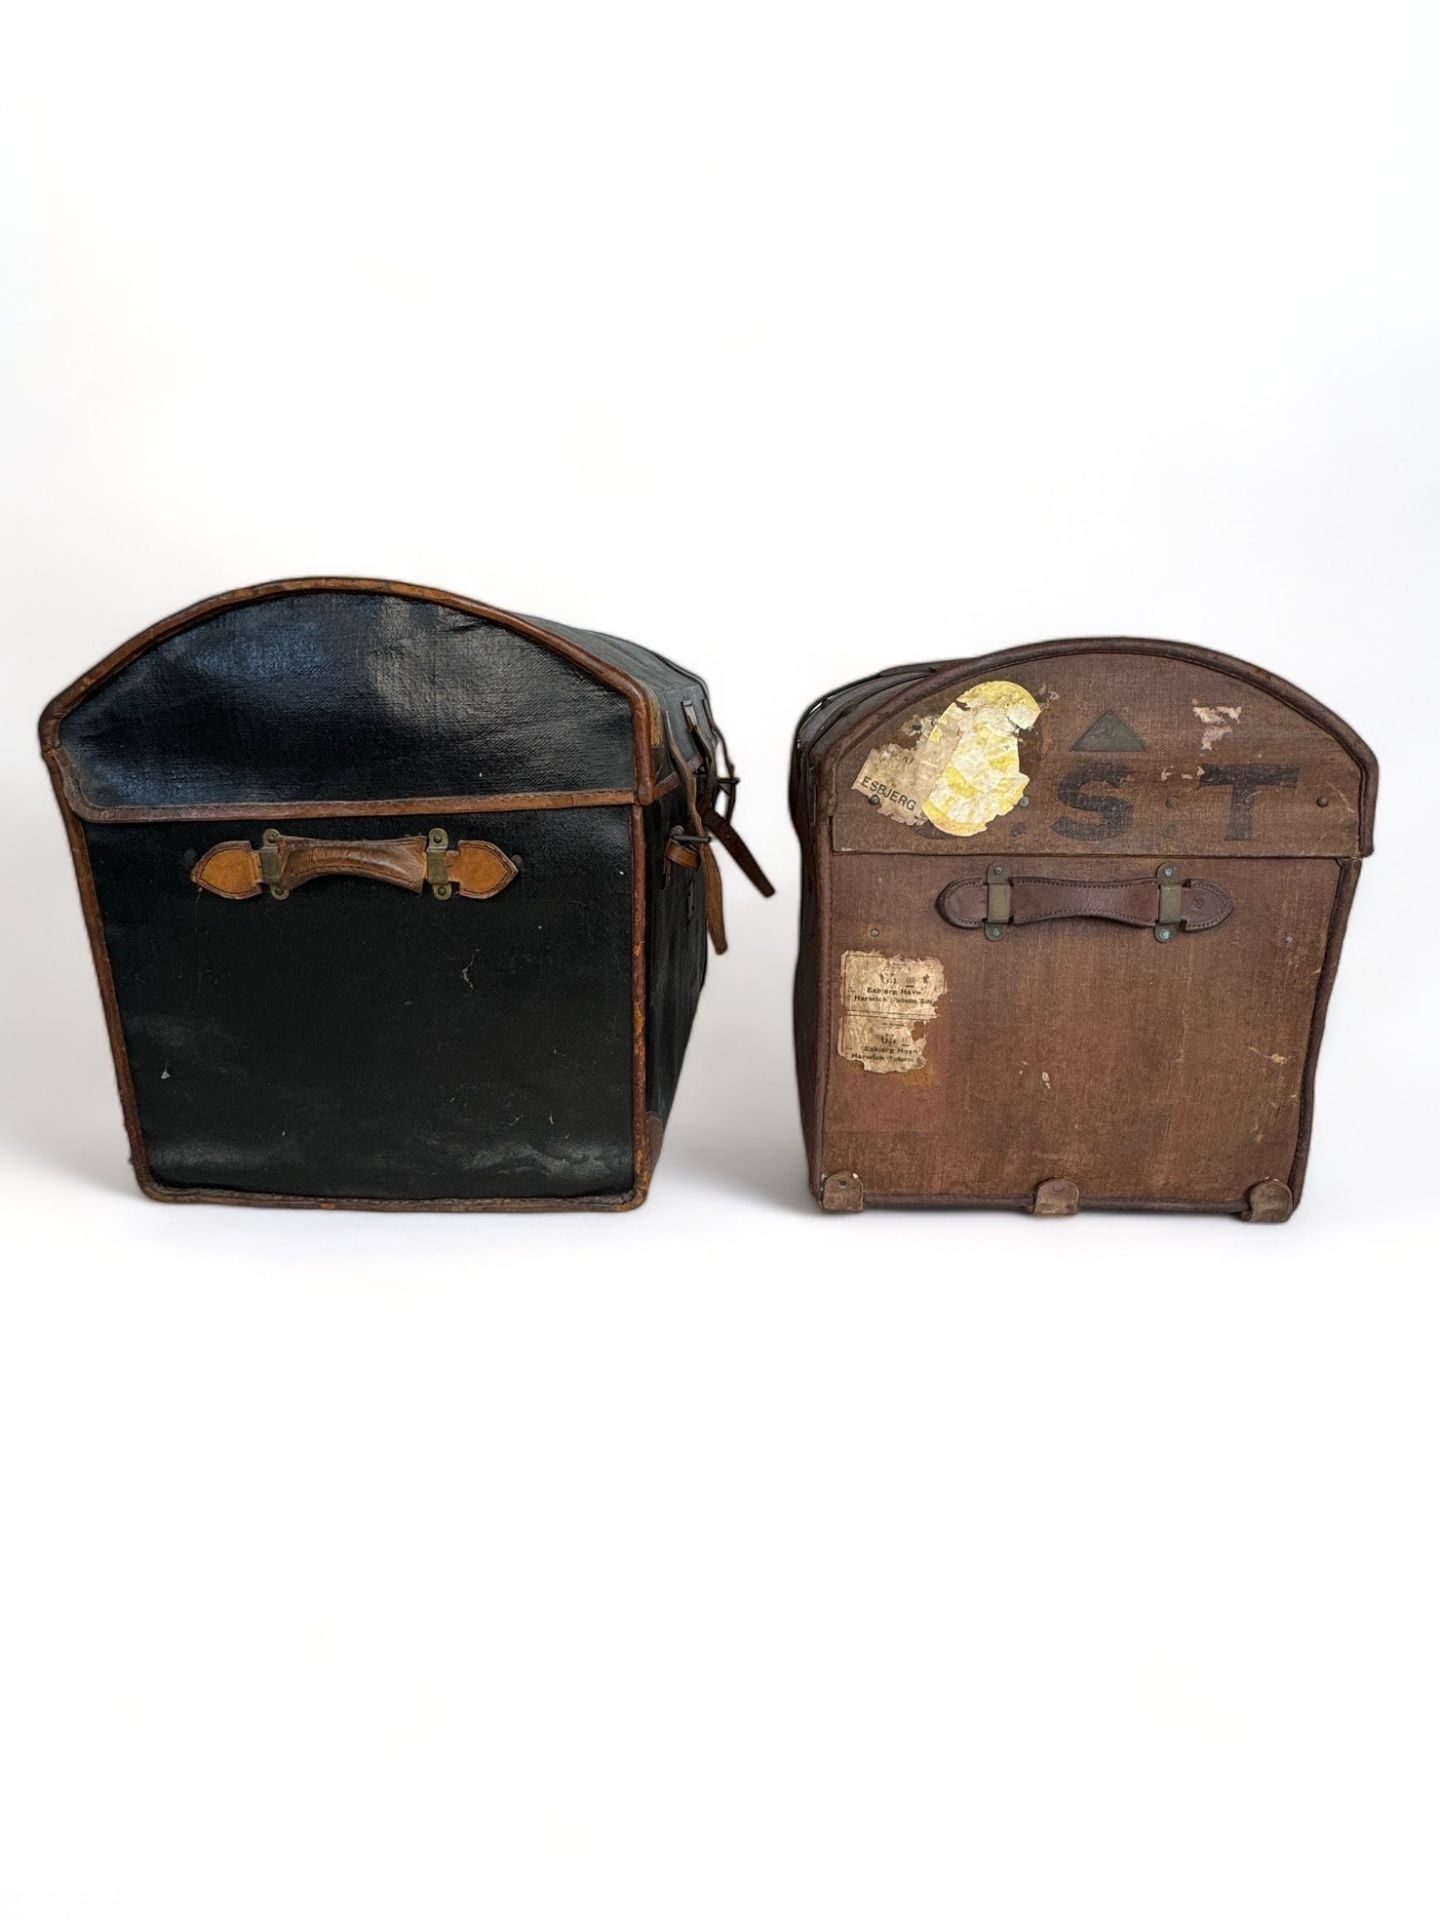 Two 19th century domed top travelling trunks - Image 4 of 8